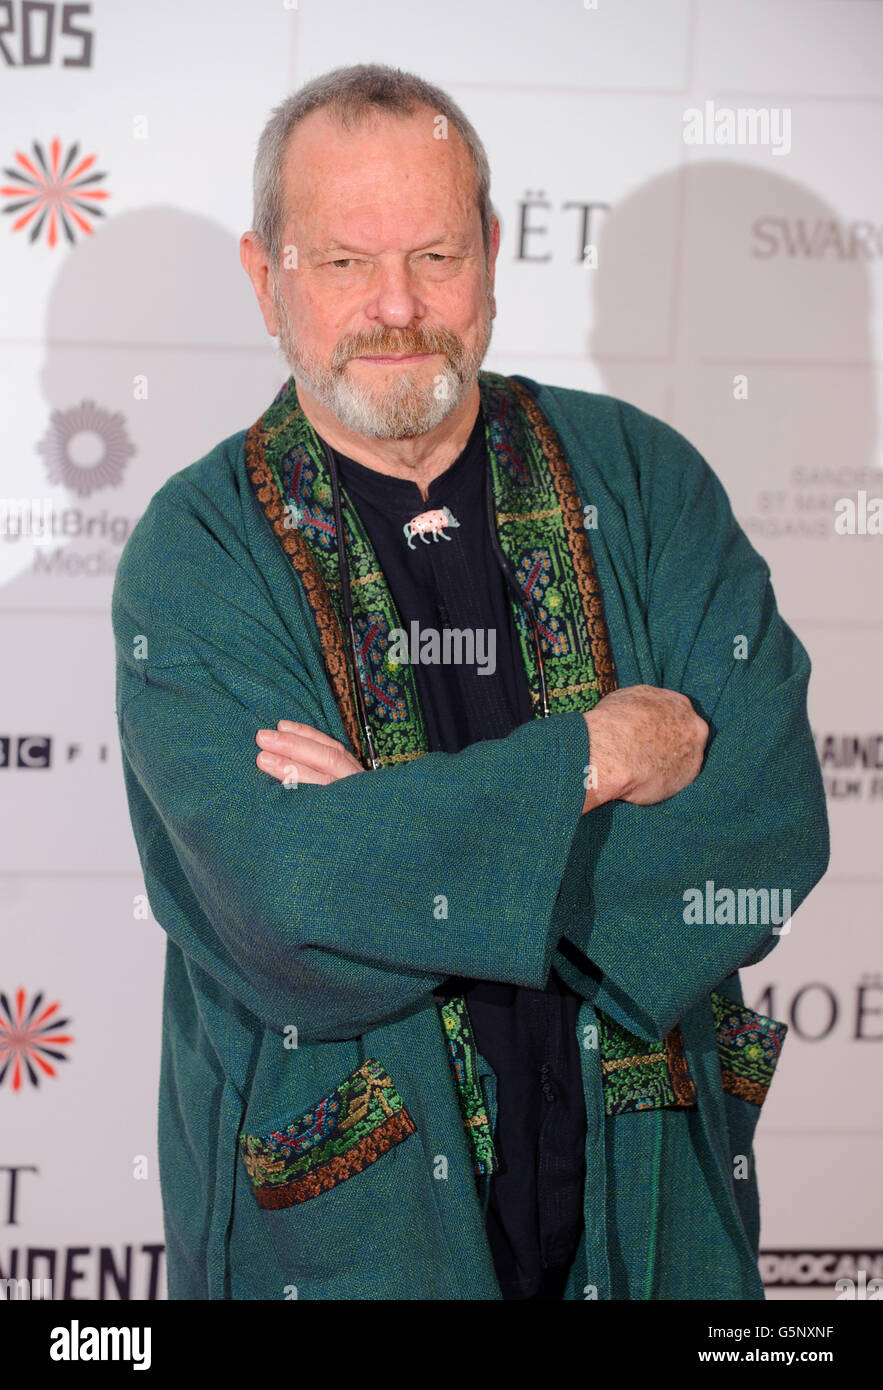 Terry Gilliam arriving at the Moet British Independent Film Awards, at Old Billingsgate, in central London. Stock Photo